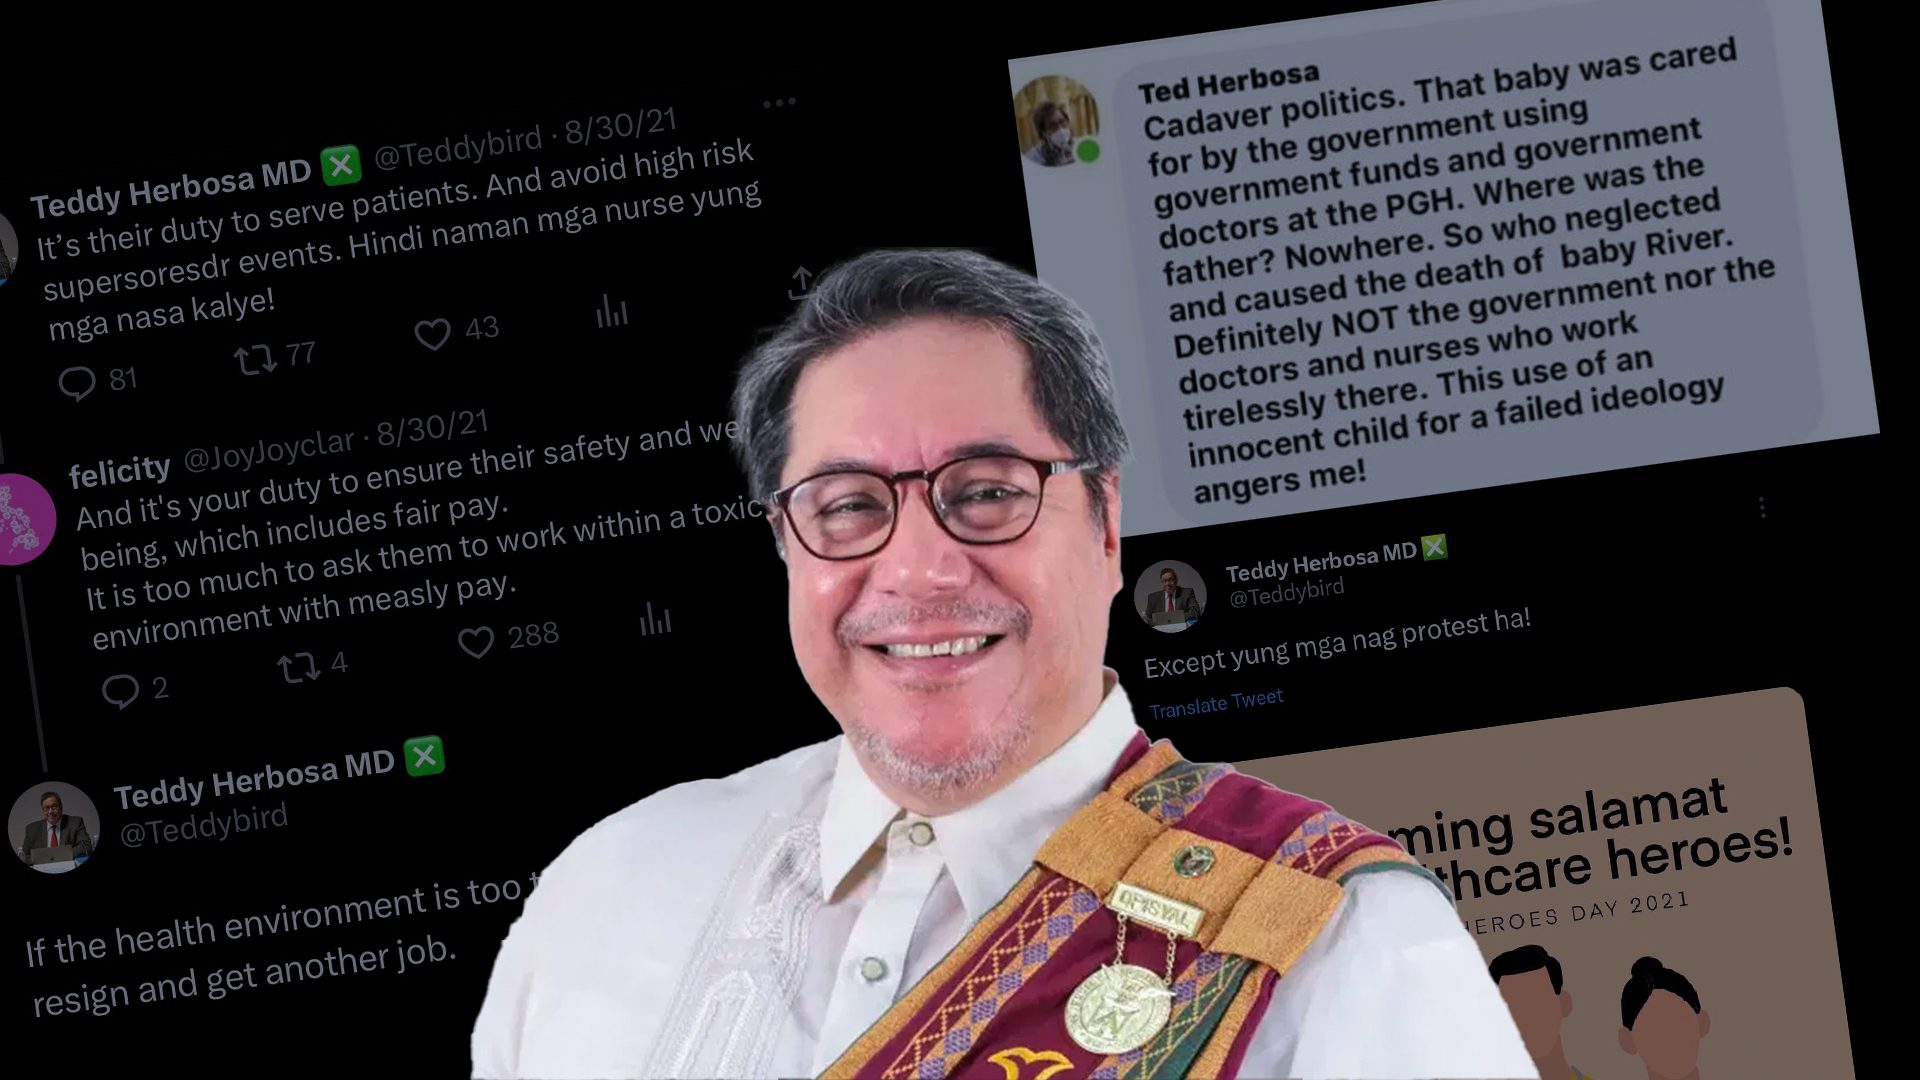 LIST: DOH Secretary Ted Herbosa’s controversial statements in the past